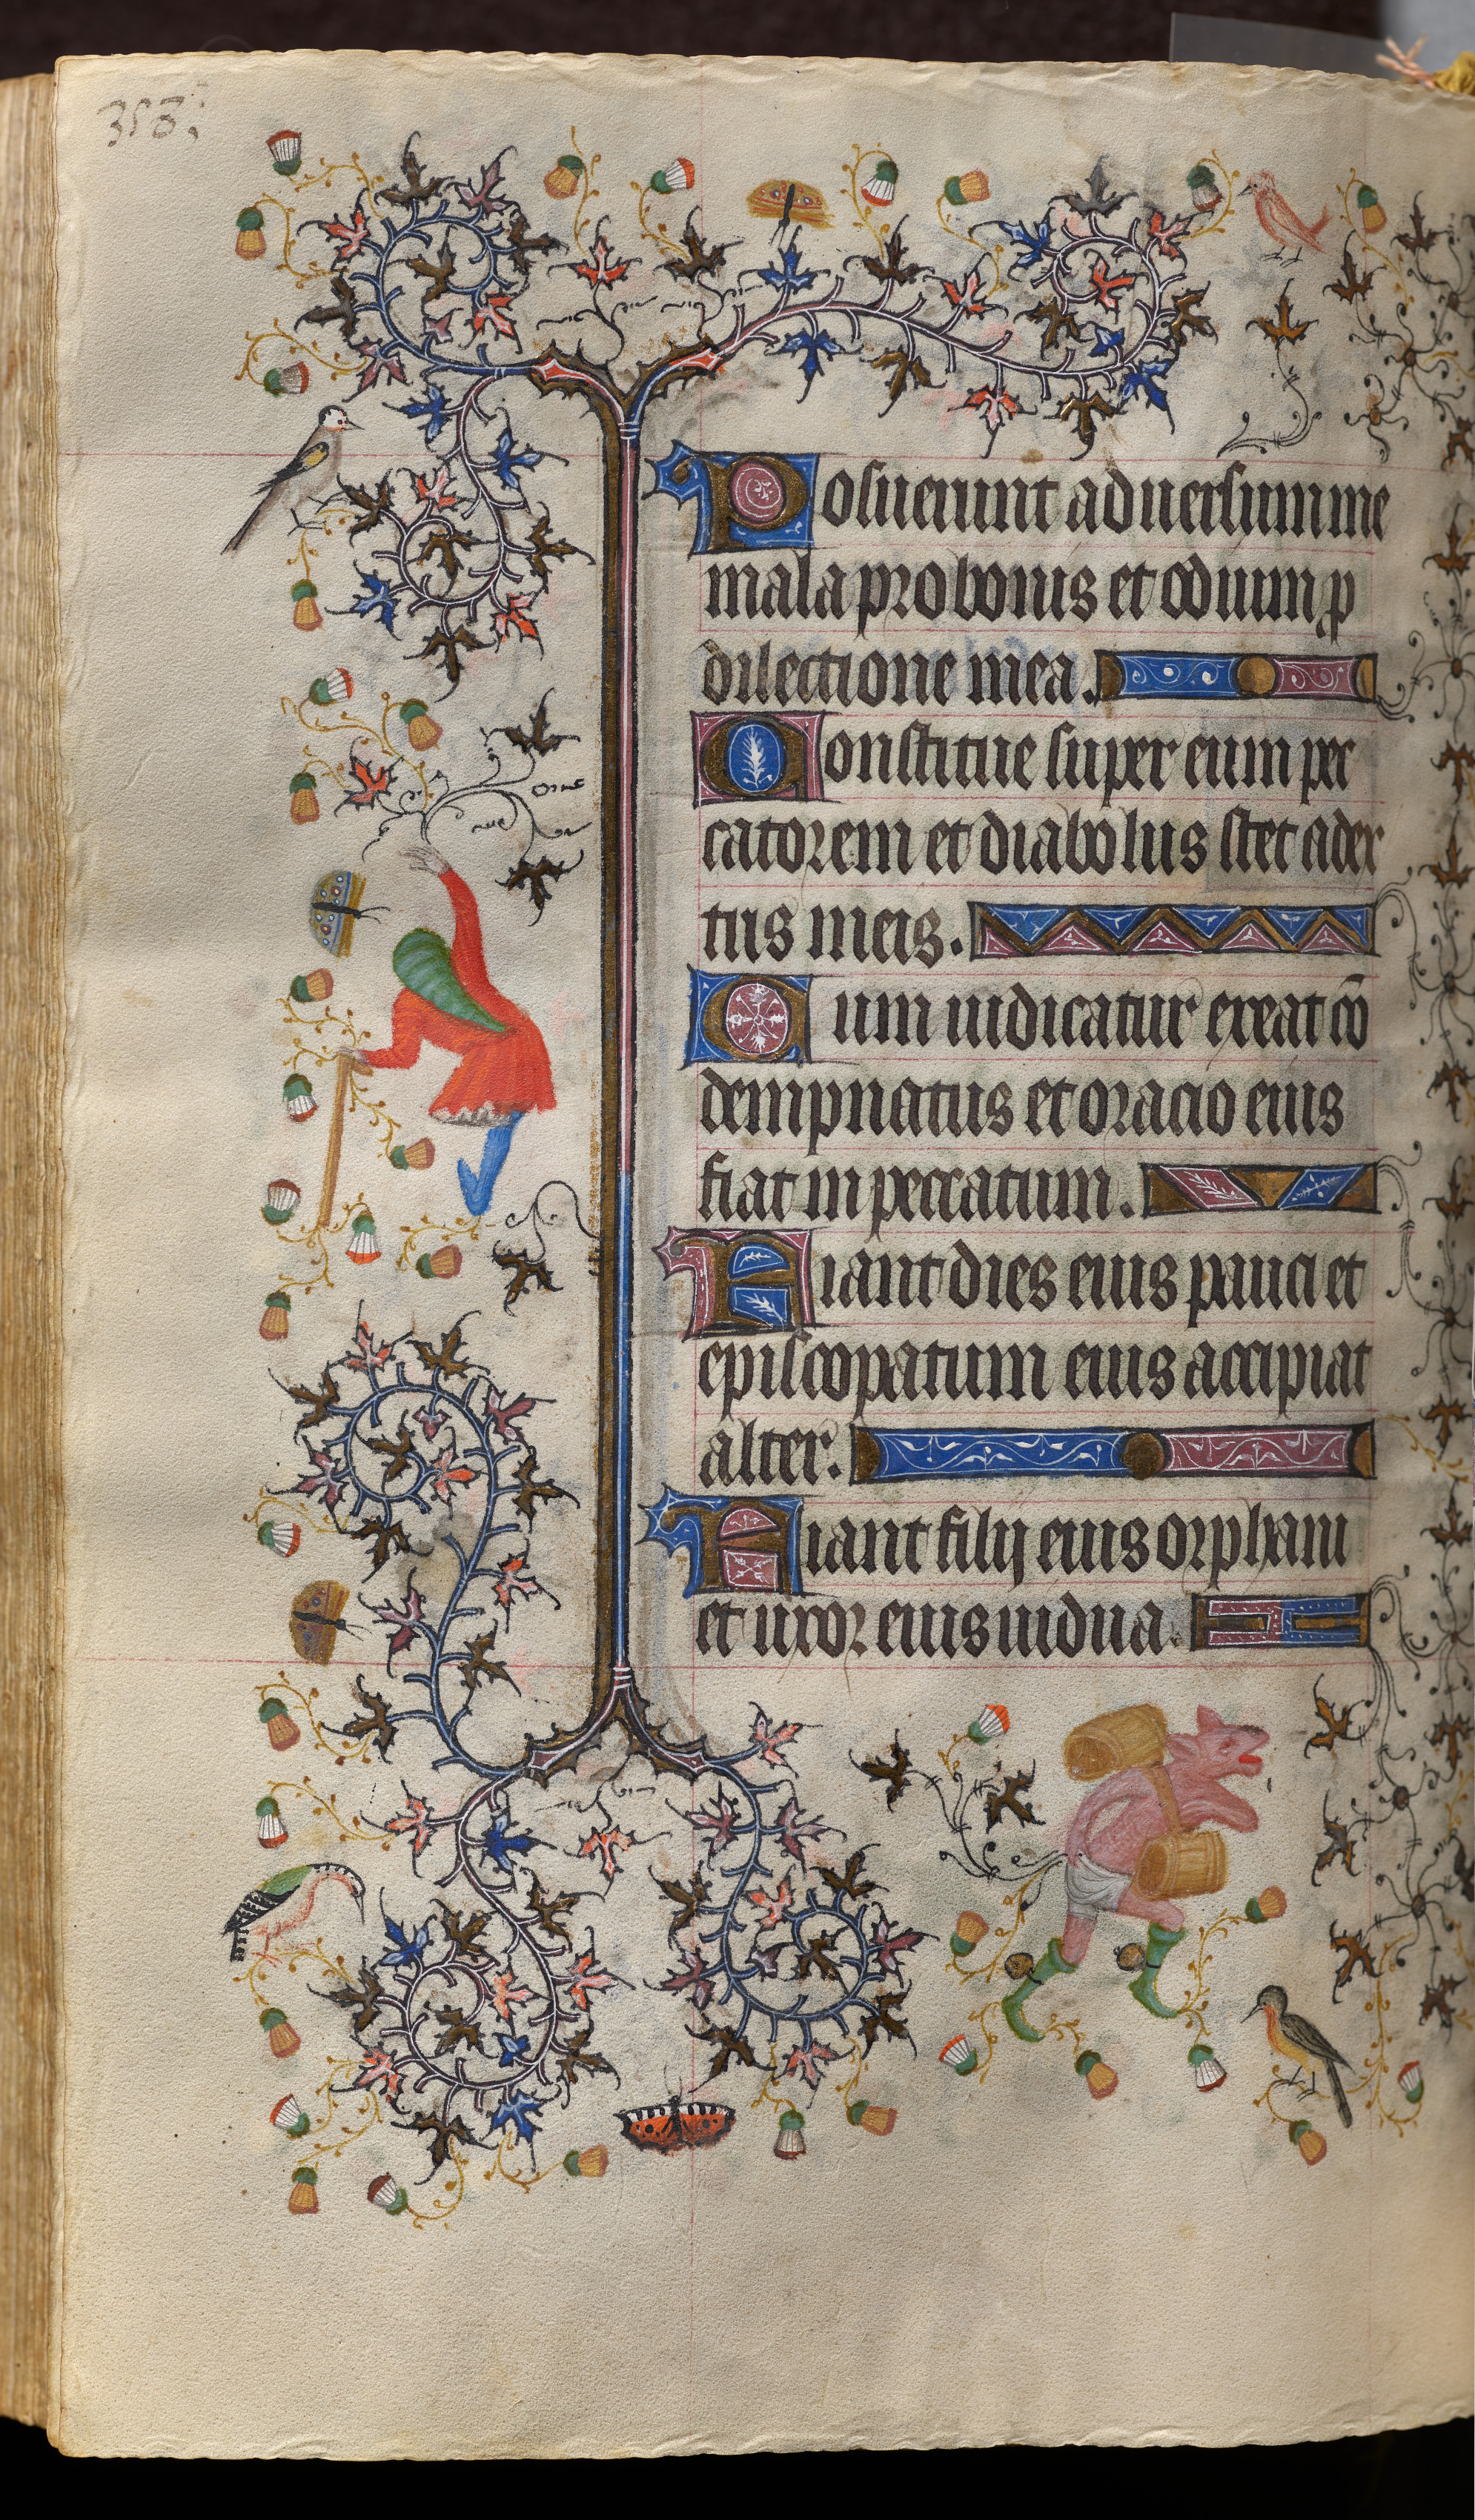 Hours of Charles the Noble, King of Navarre (1361-1425): fol. 174v, Text